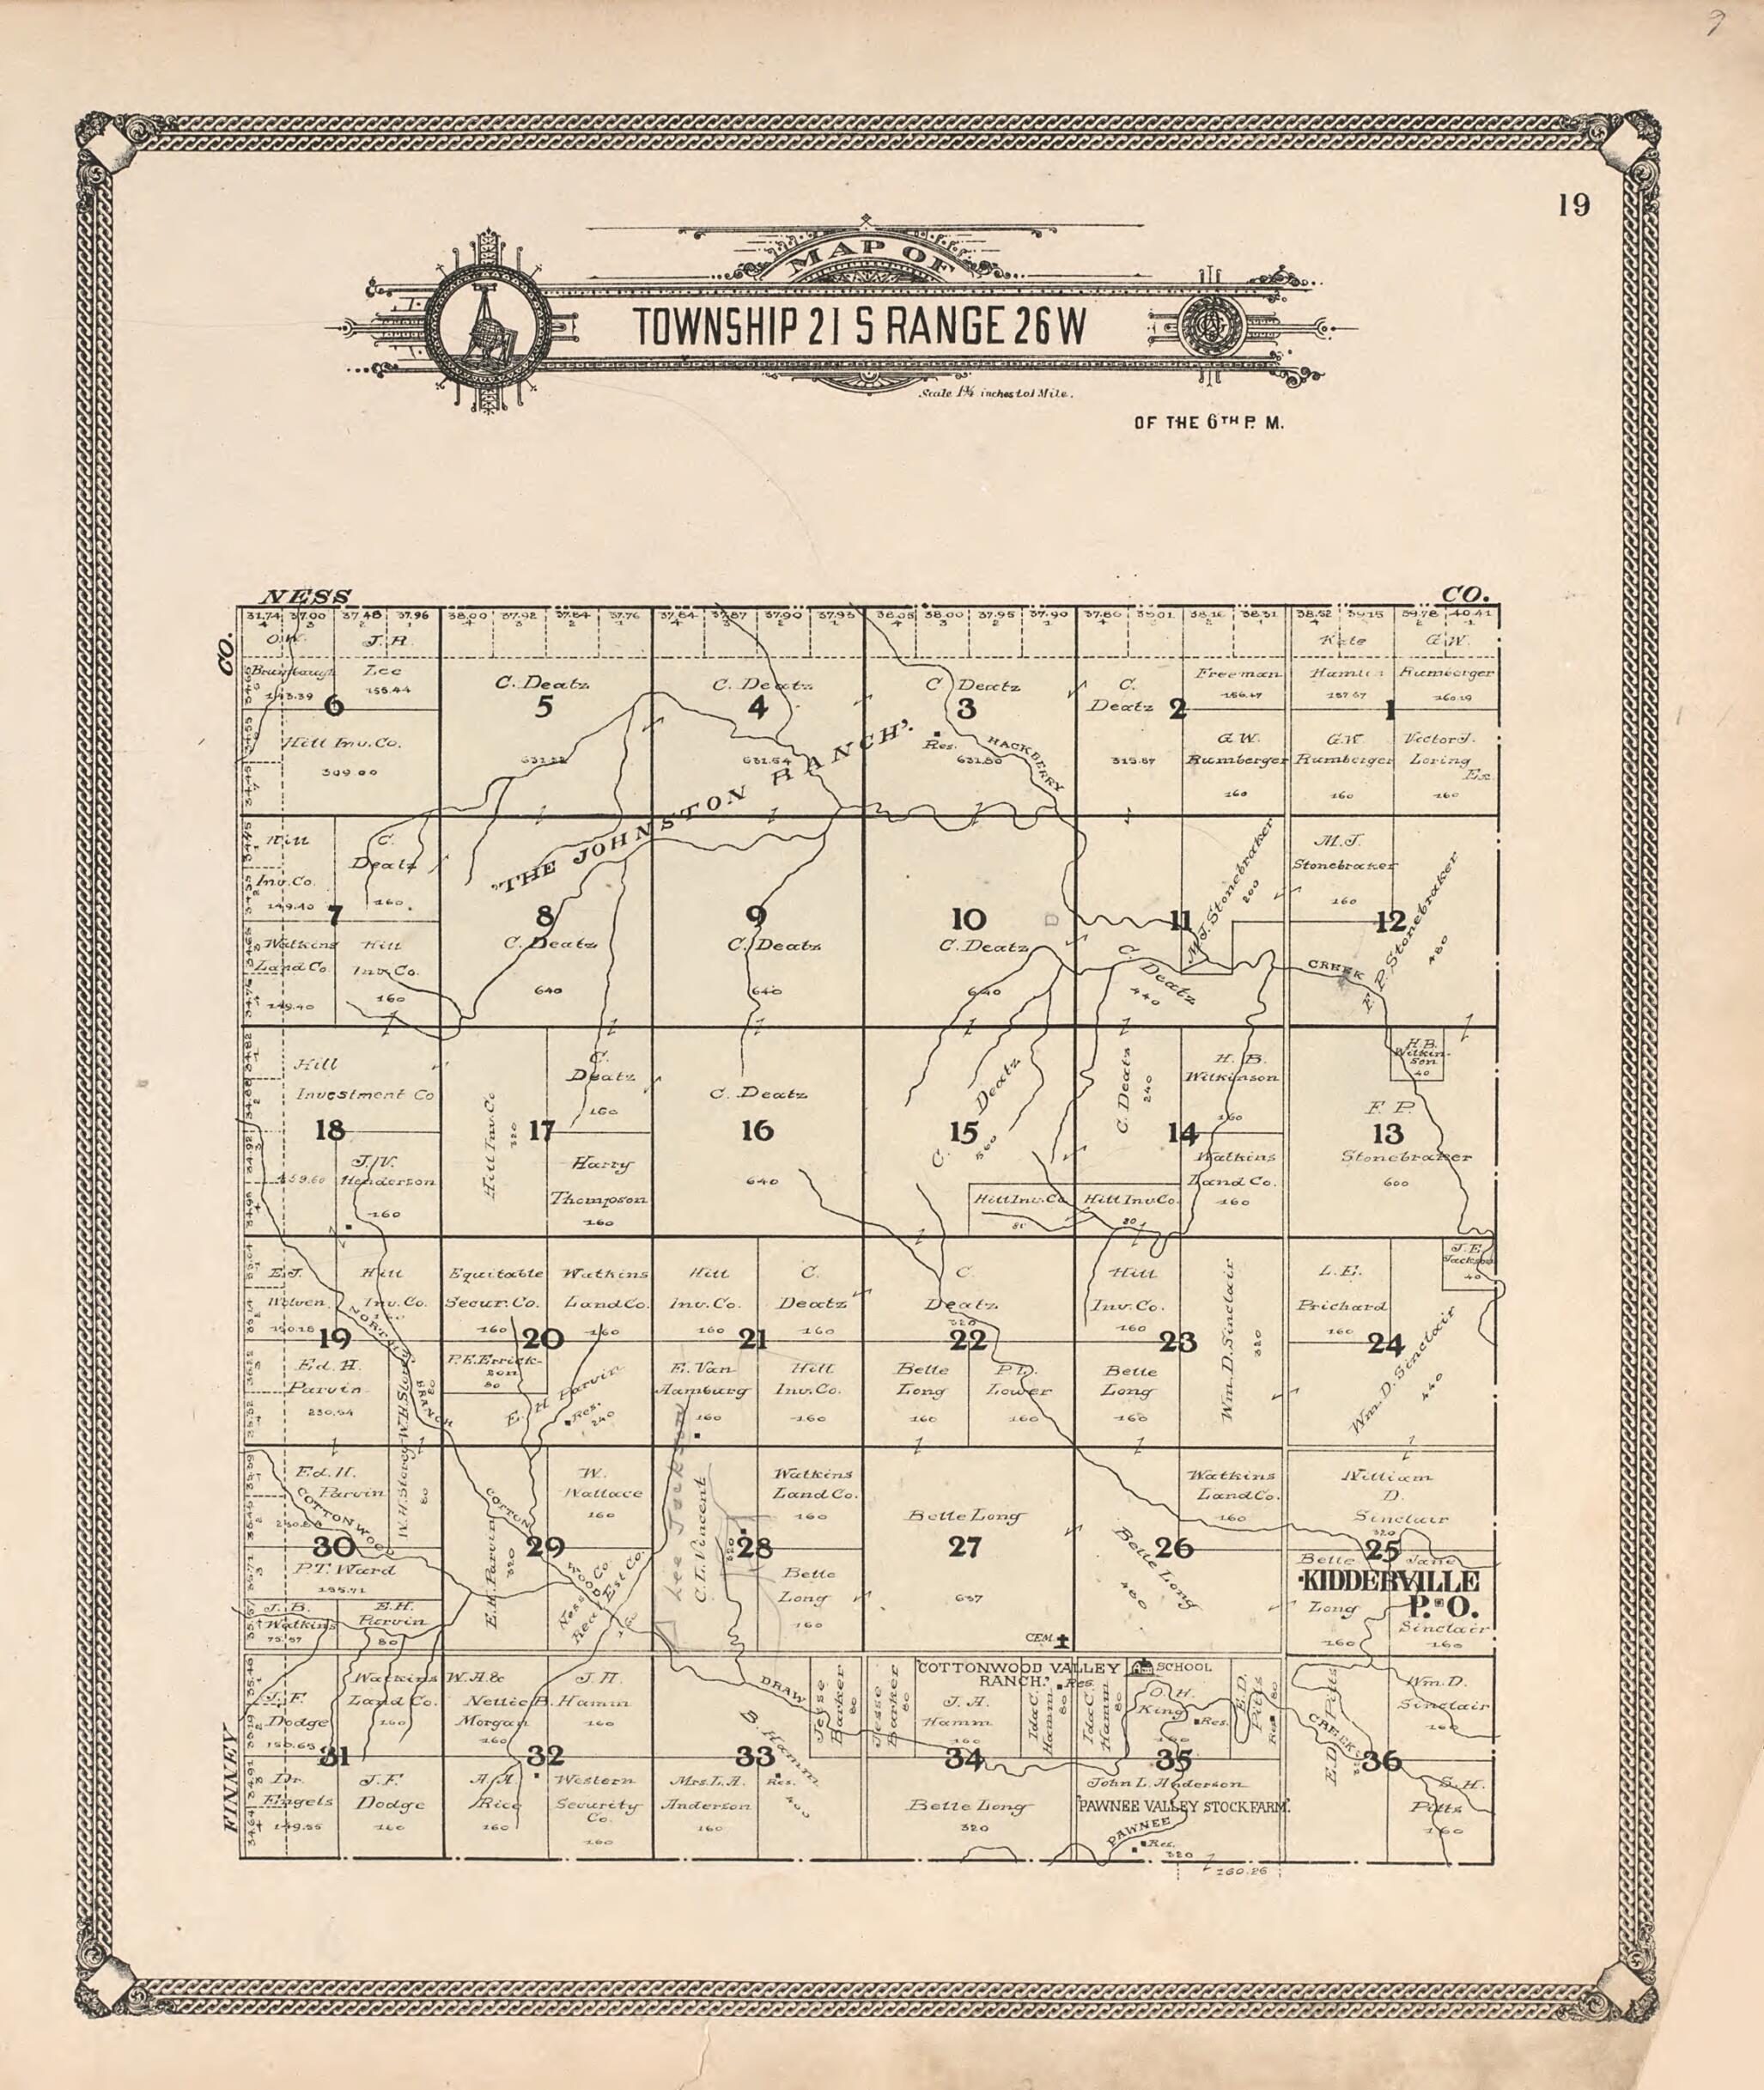 This old map of Map of Township 21 S Range 26 W from Standard Atlas of Hodgeman County, Kansas from 1907 was created by  Geo. A. Ogle &amp; Co in 1907